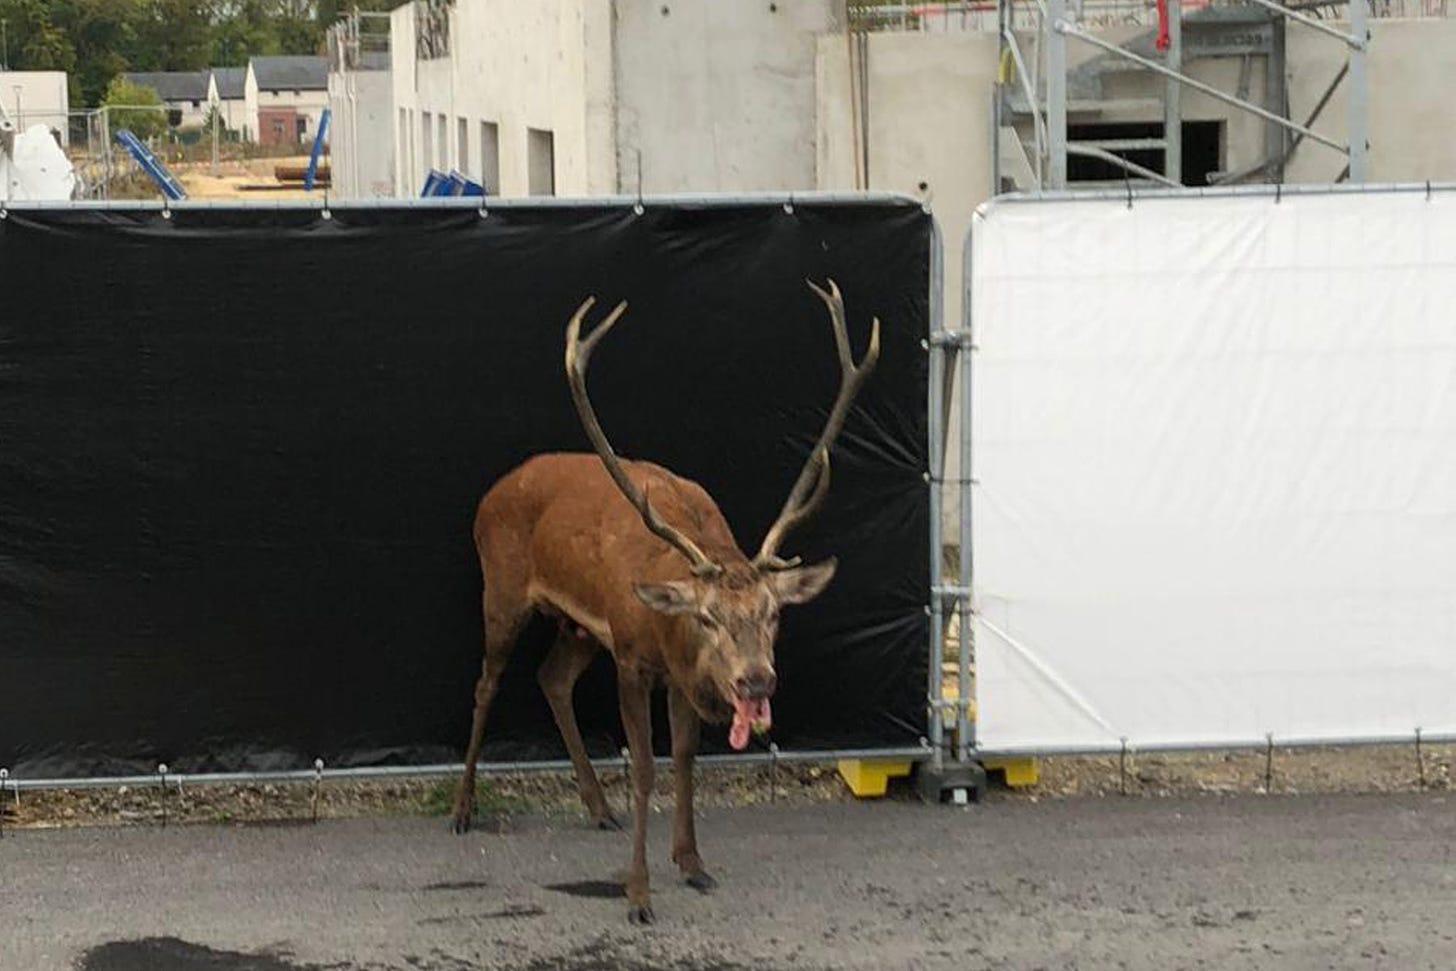 A tired looking stag stood on the edge of a building site.